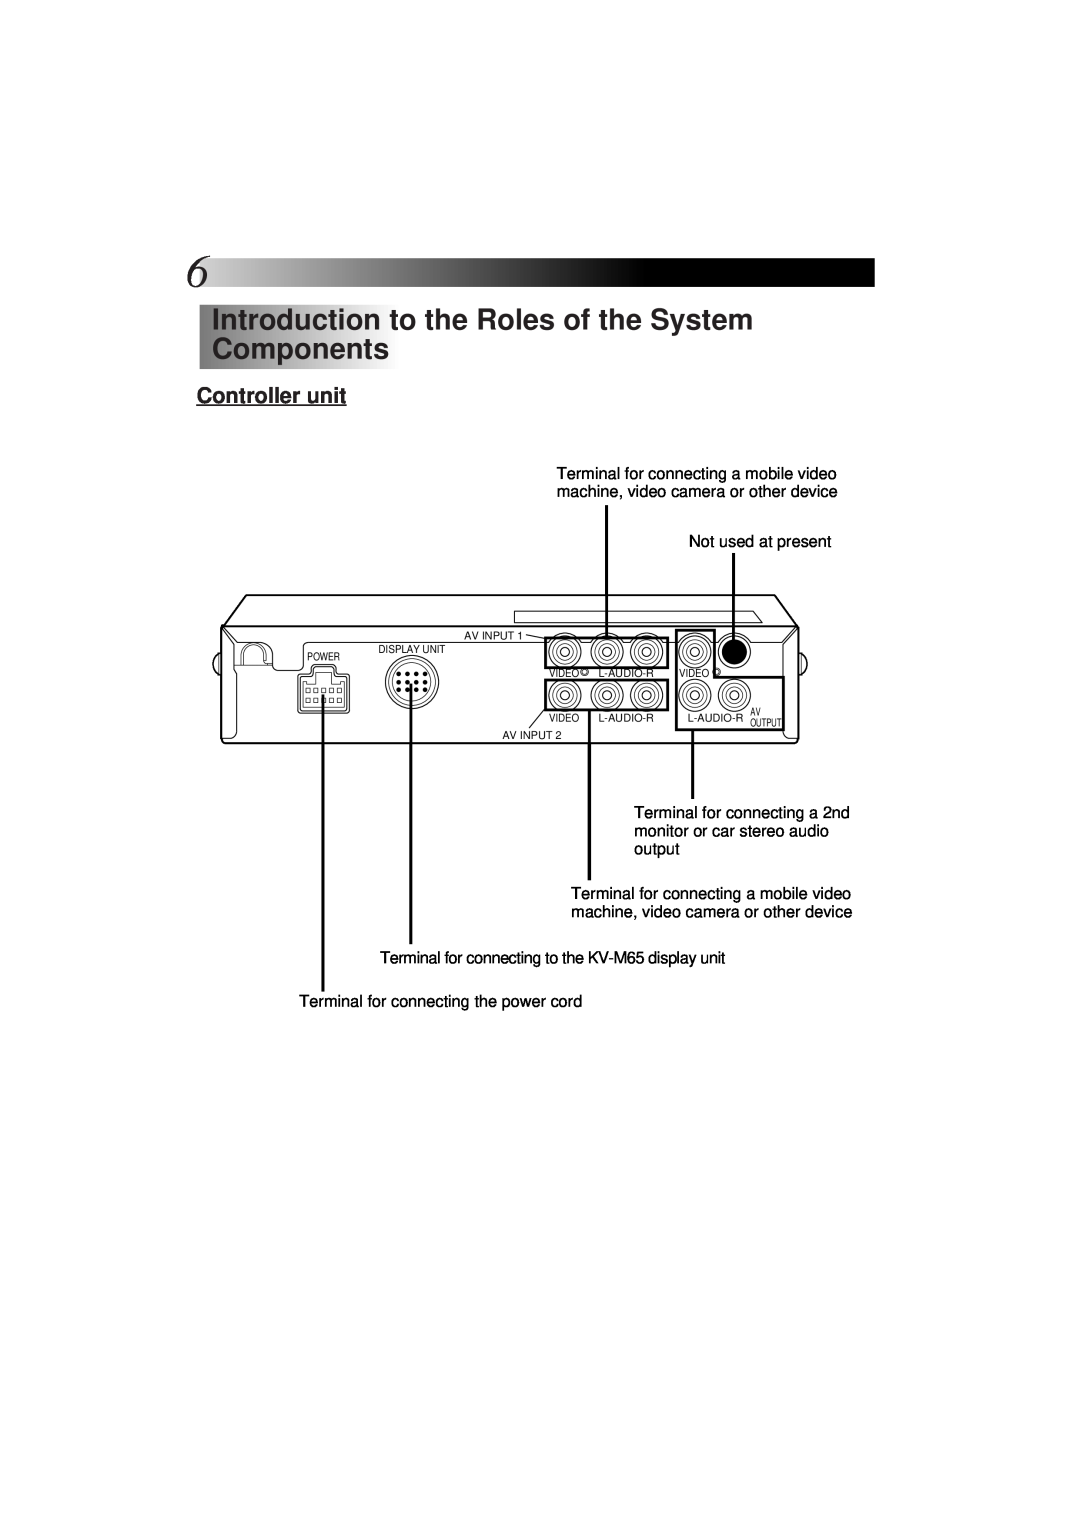 JVC KV-M65 manual Introduction to the Roles of the System Components, Controller unit 